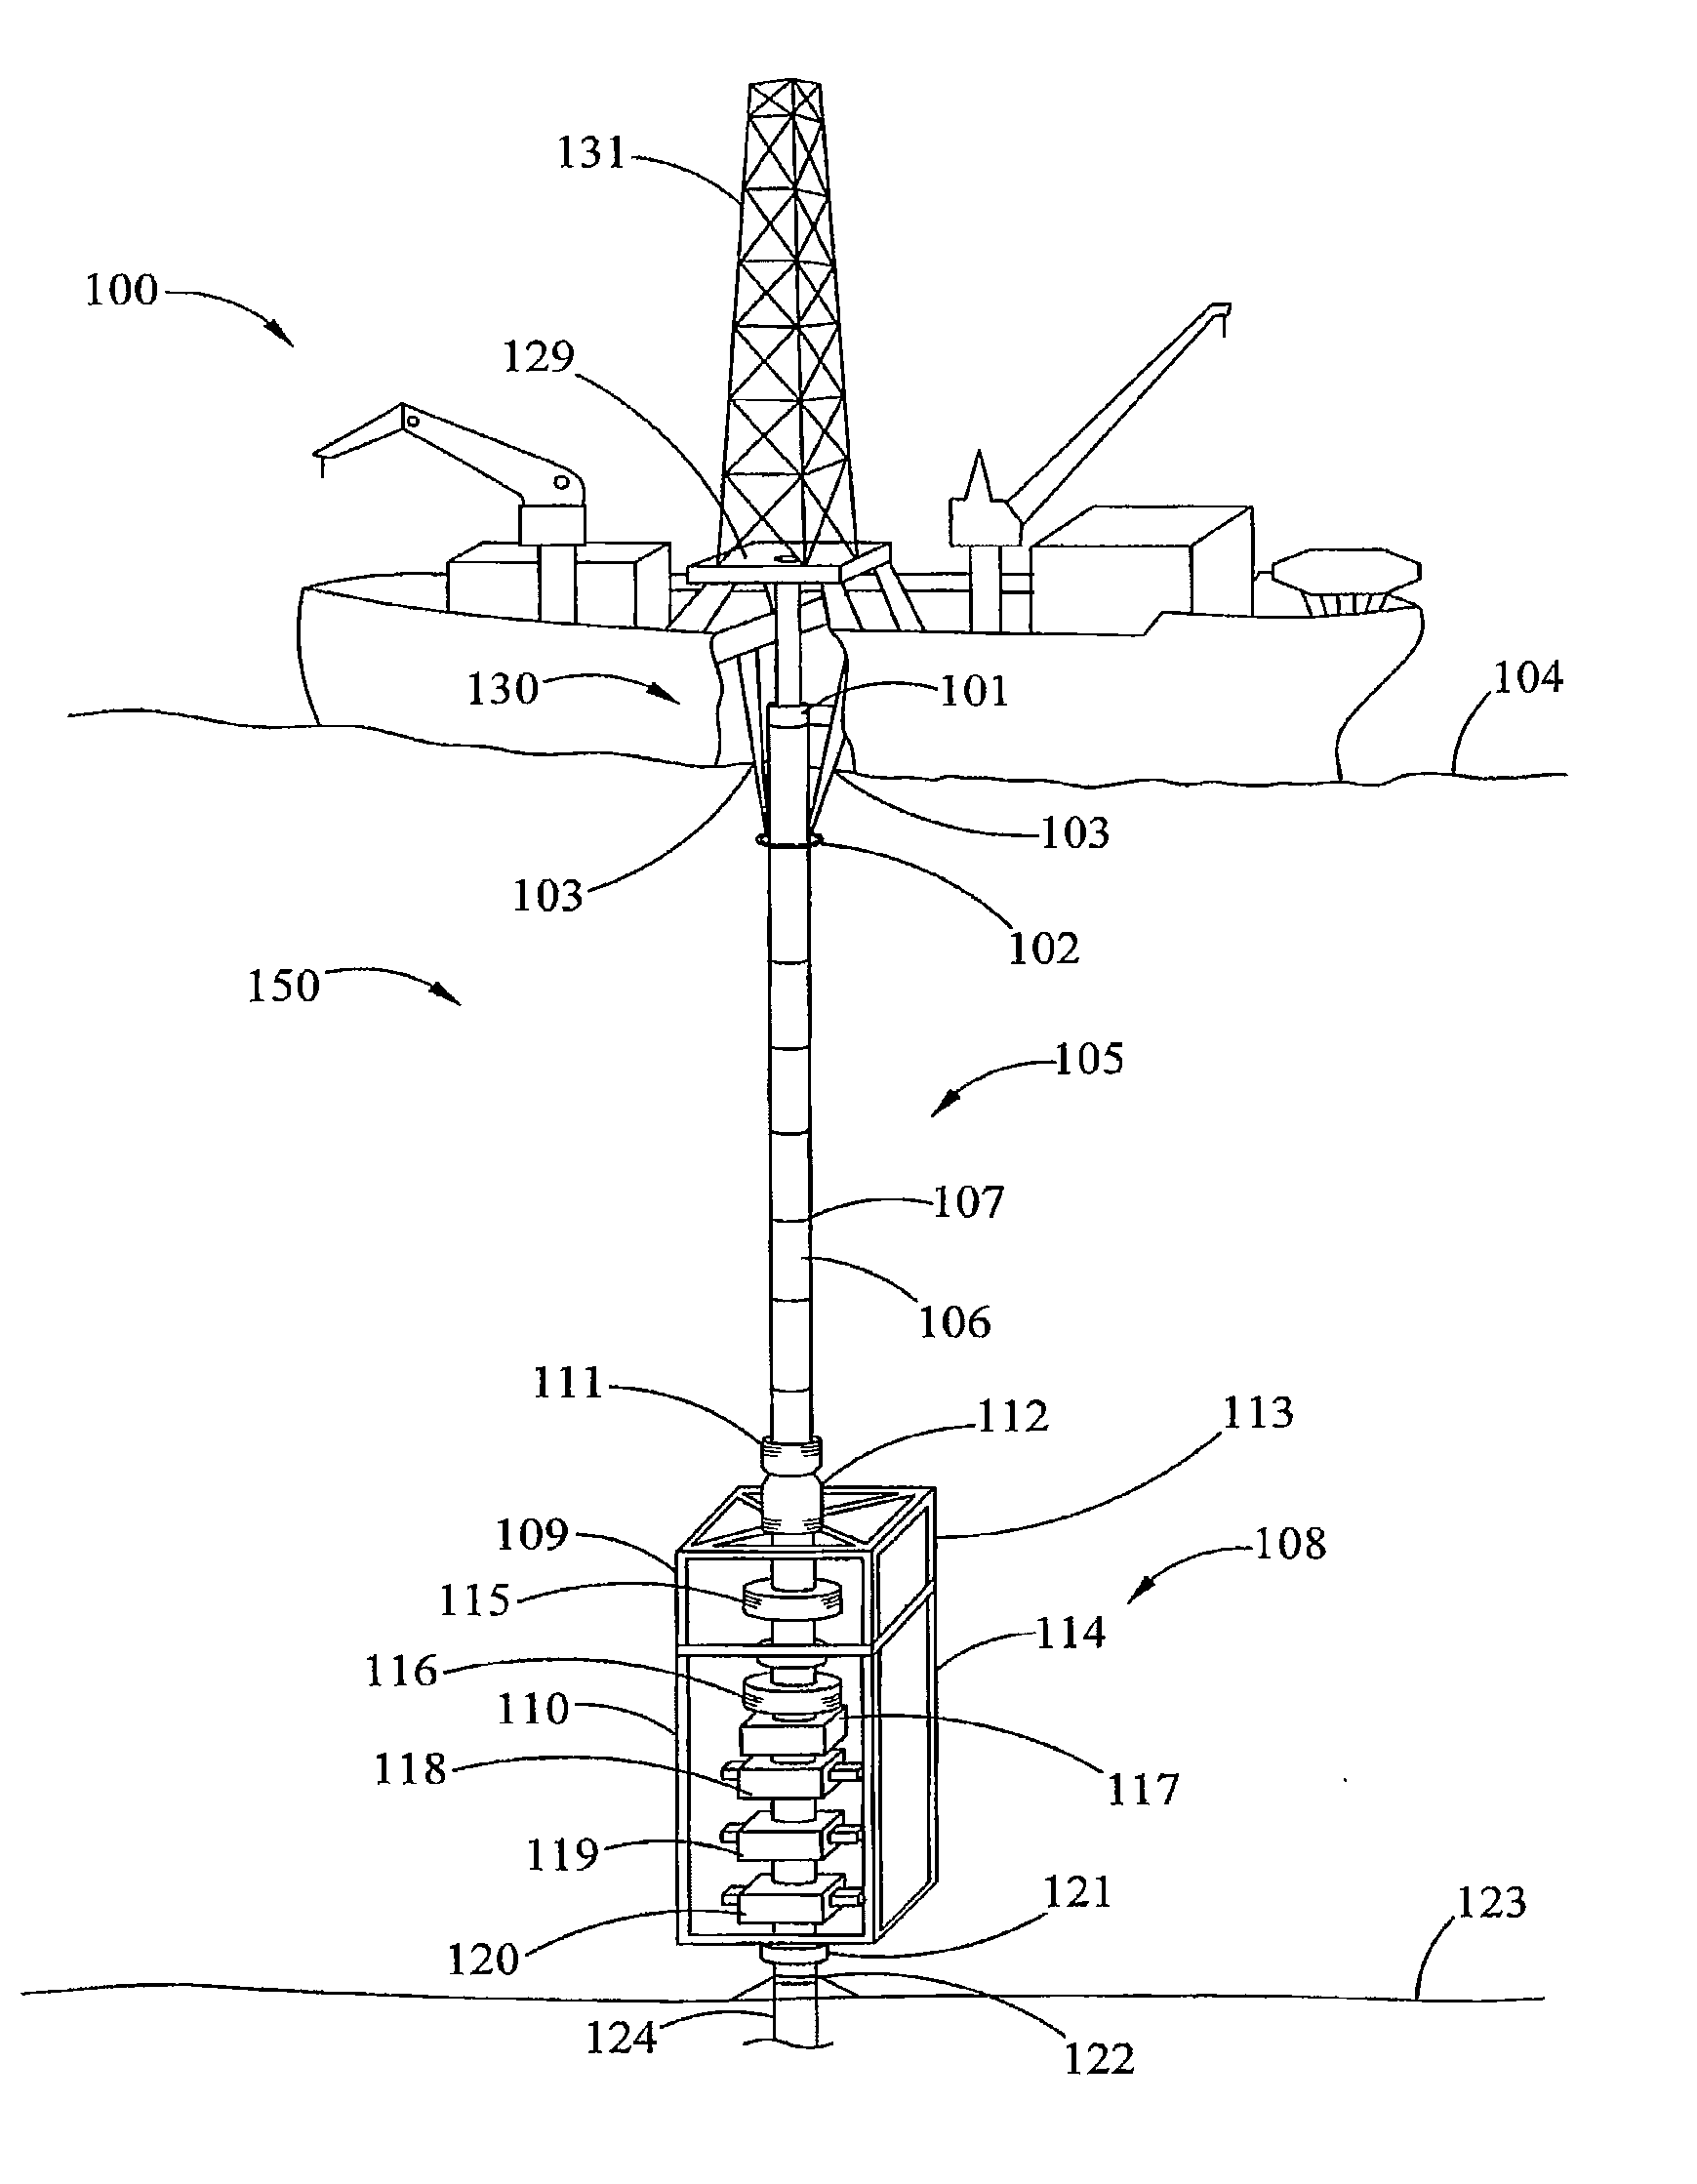 Shear laser module and method of retrofitting and use